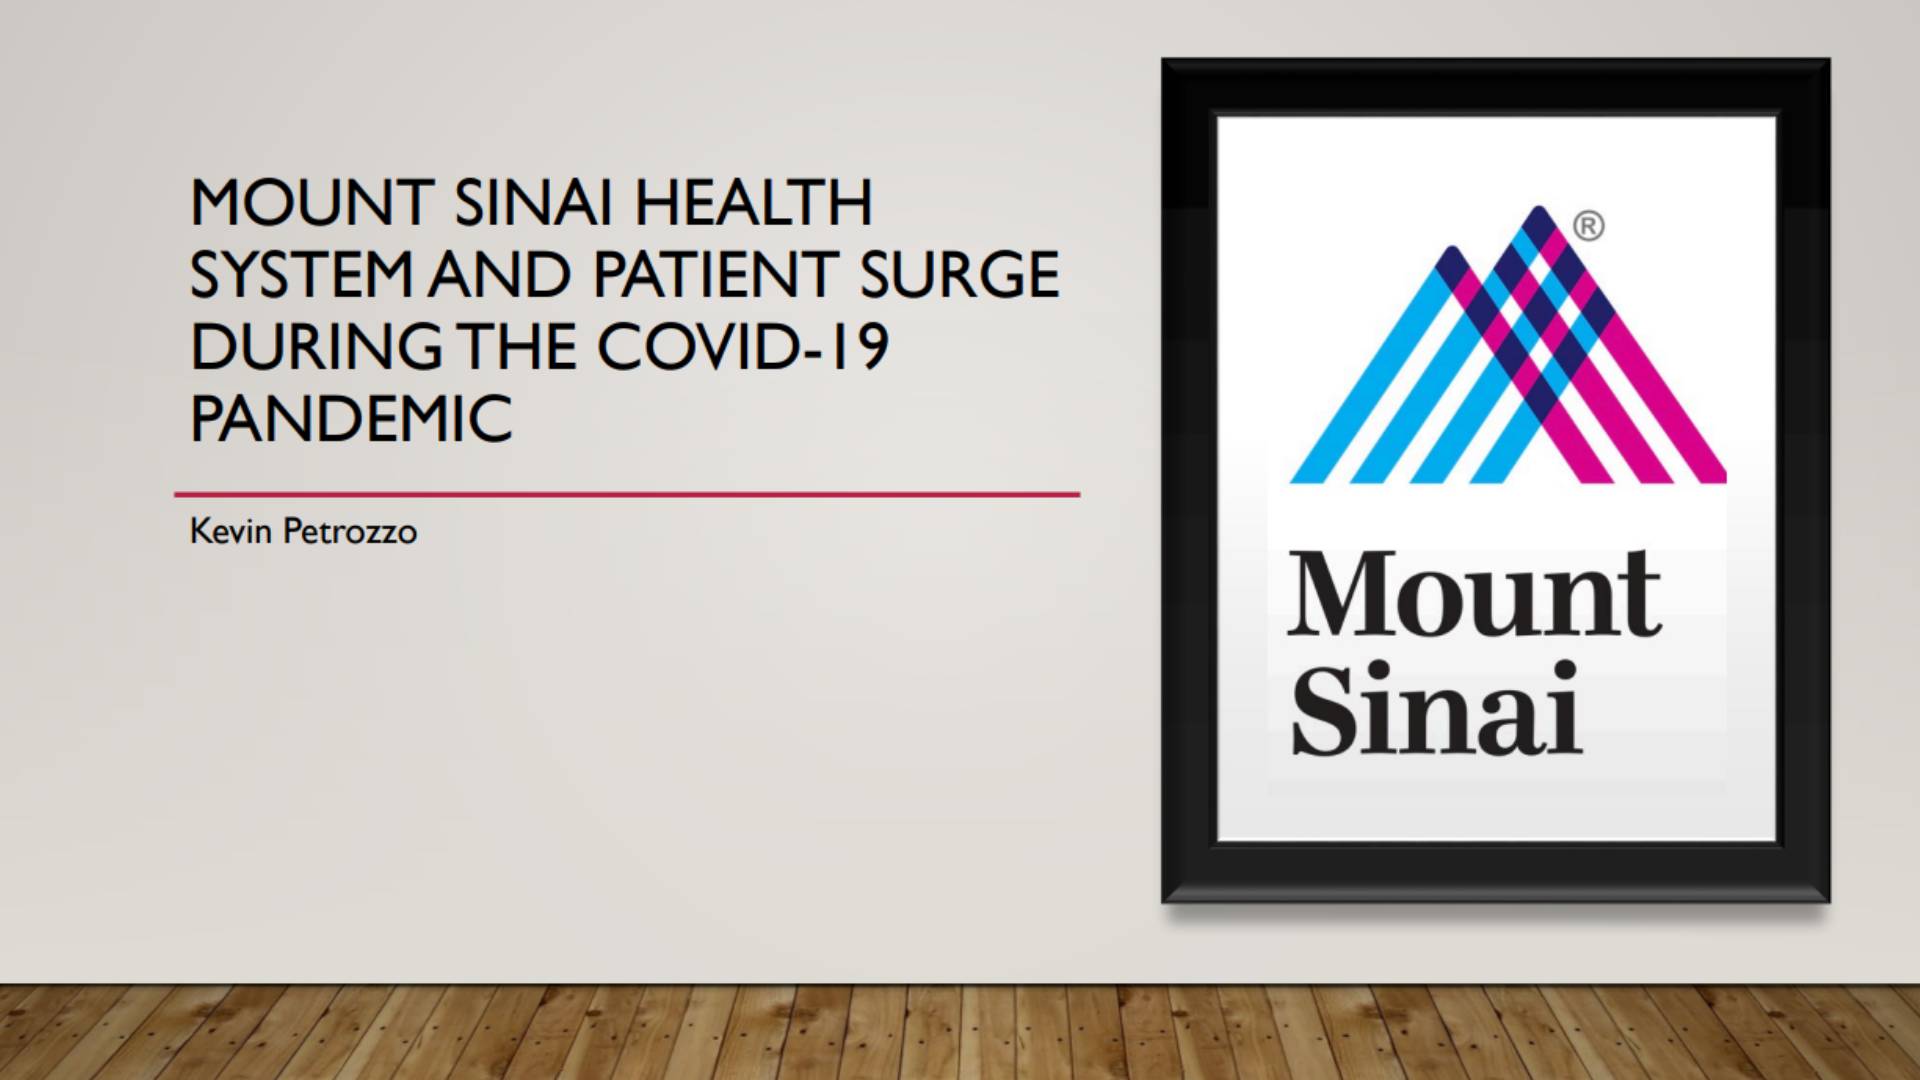 Mount Sinai Health System & Patient Surge During the Covid-19 Pandemic